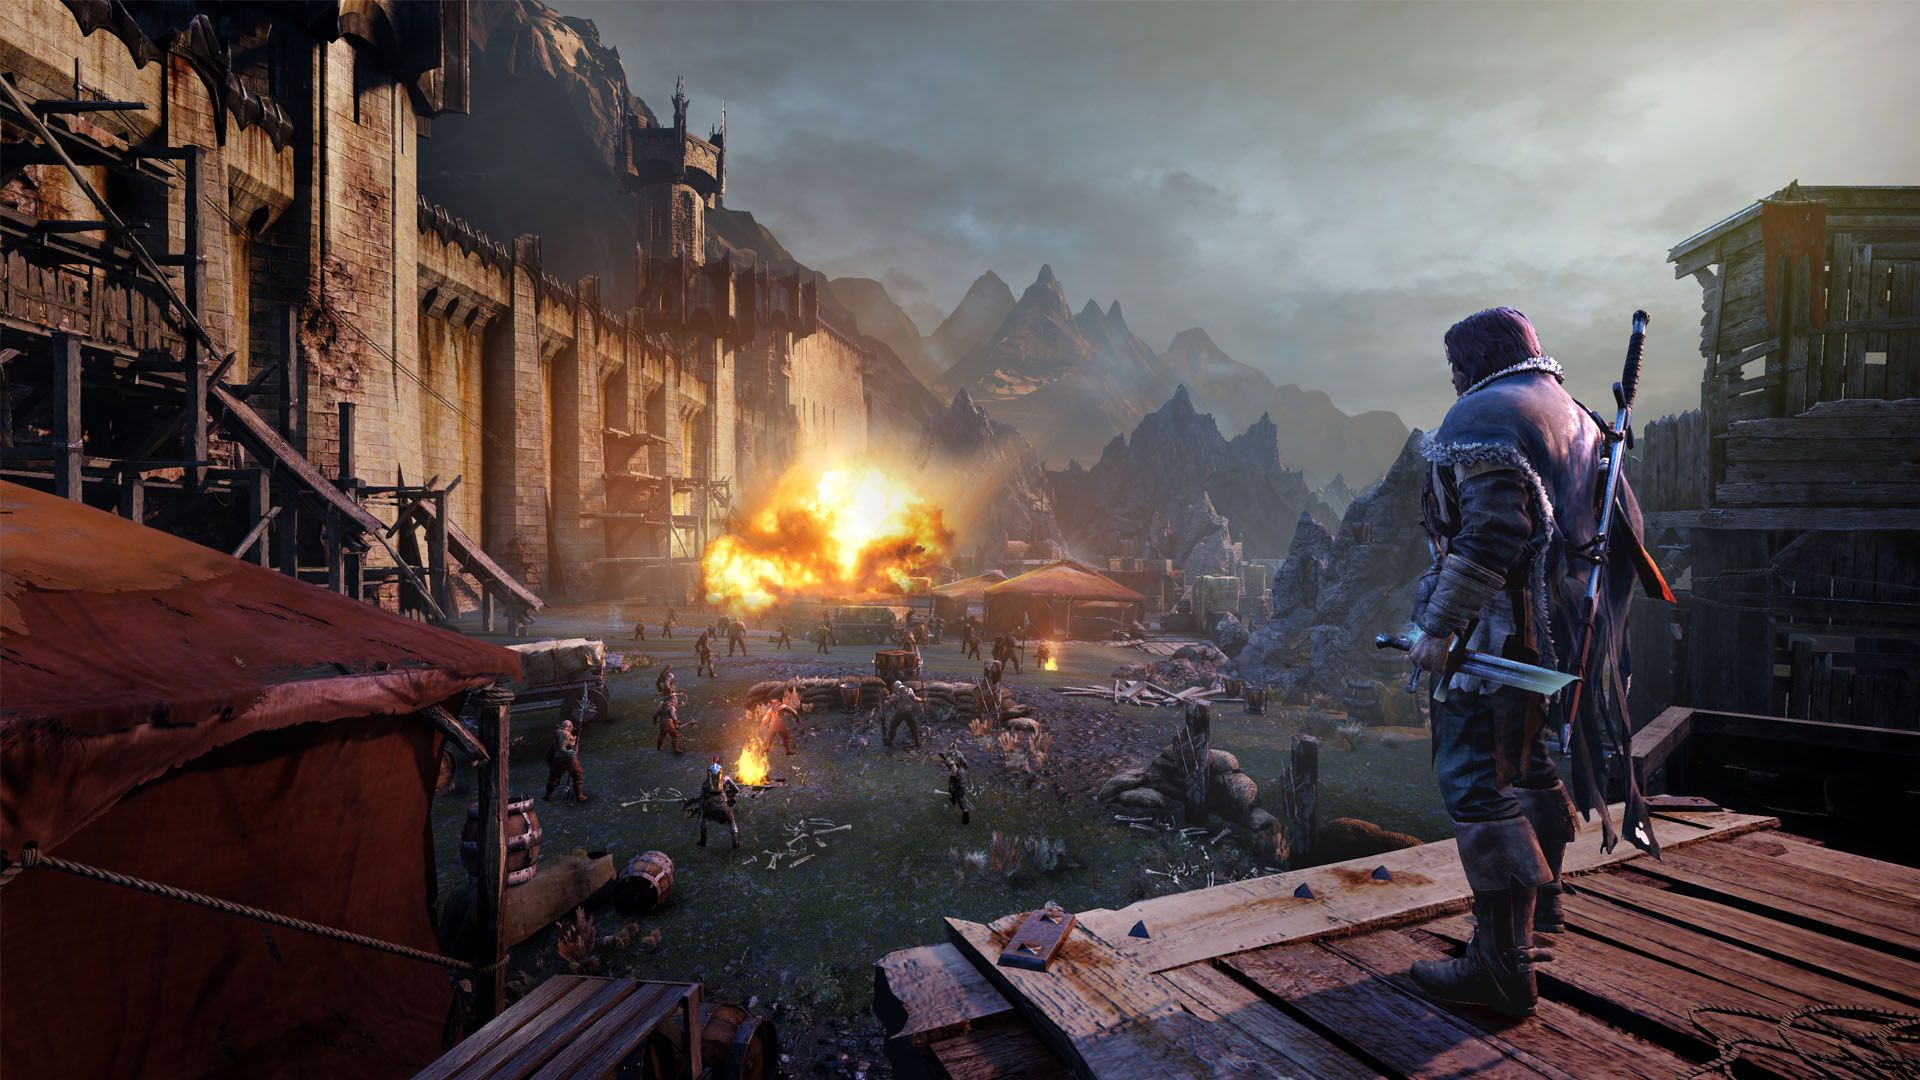 Middle-earth: Shadow of Mordor - The Bright Lord Featured Screenshot #1